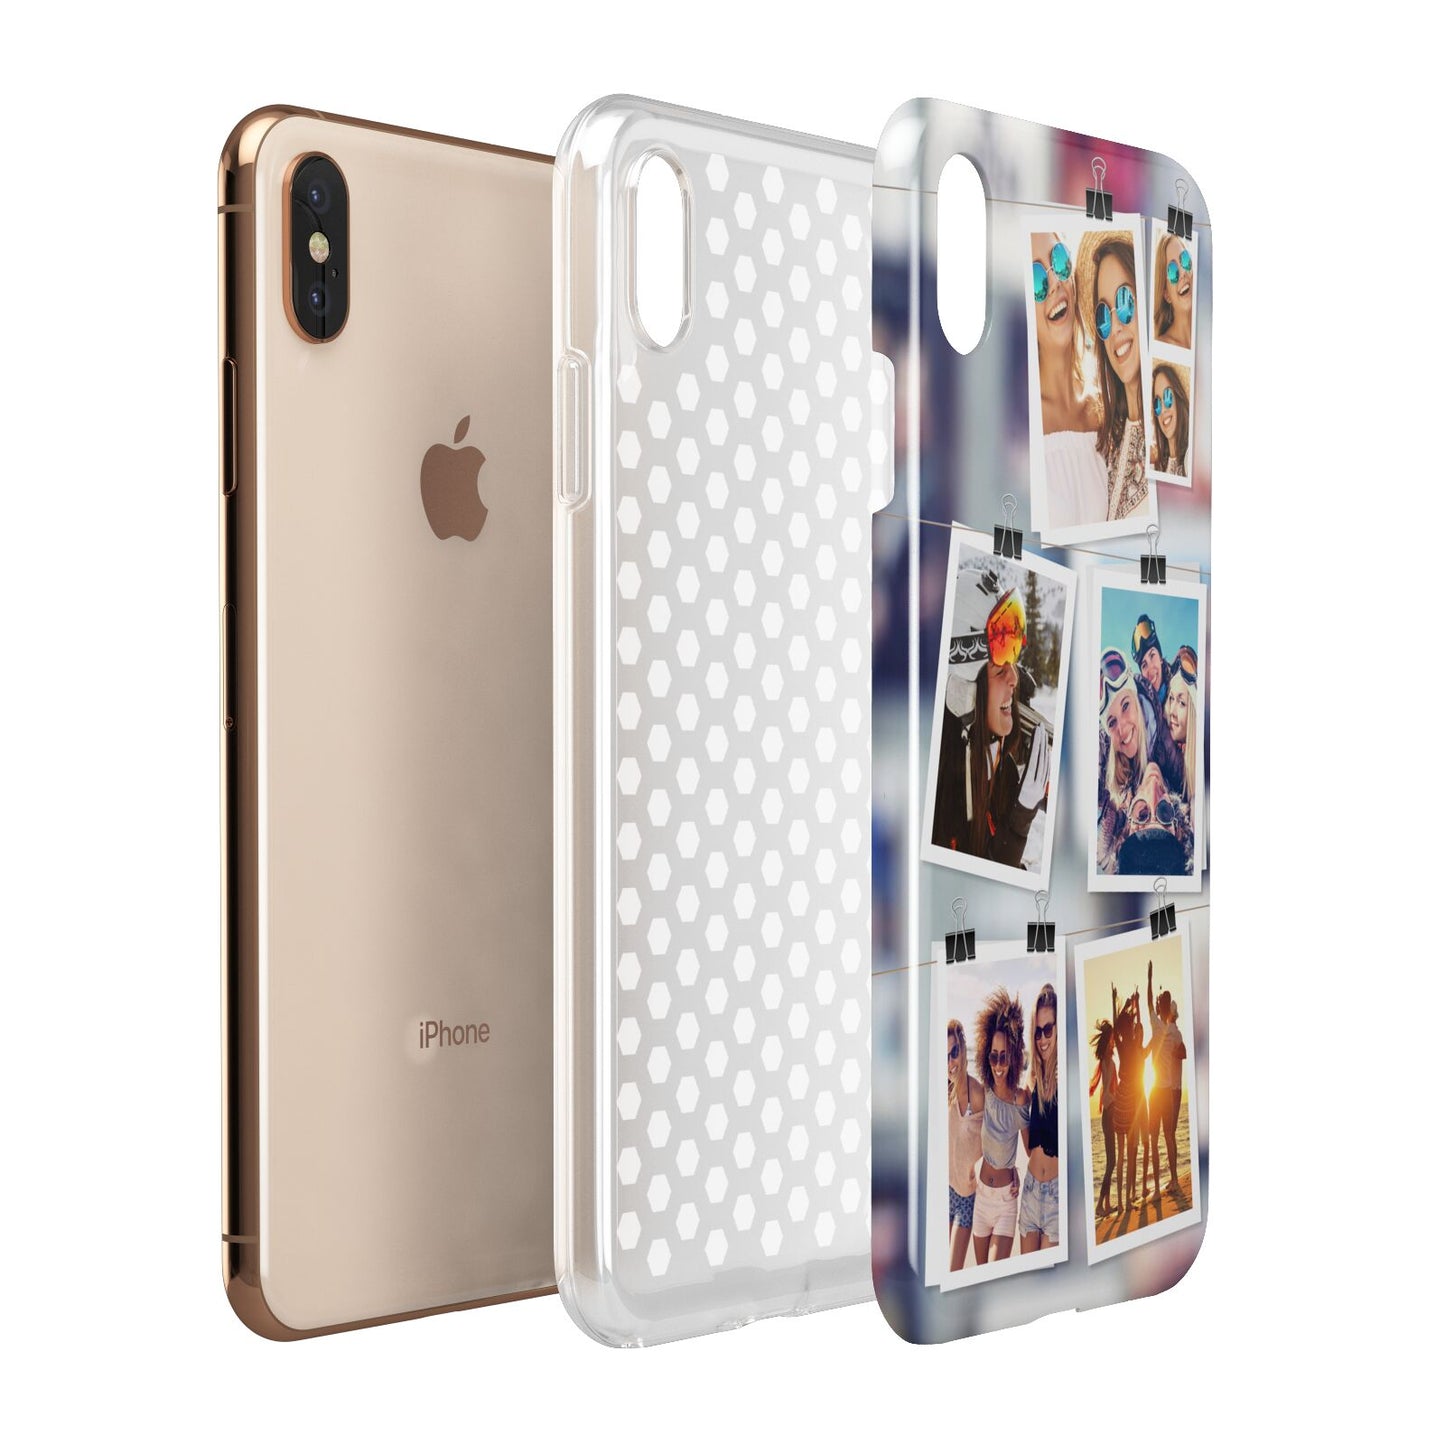 Photo Wall Montage Upload Apple iPhone Xs Max 3D Tough Case Expanded View